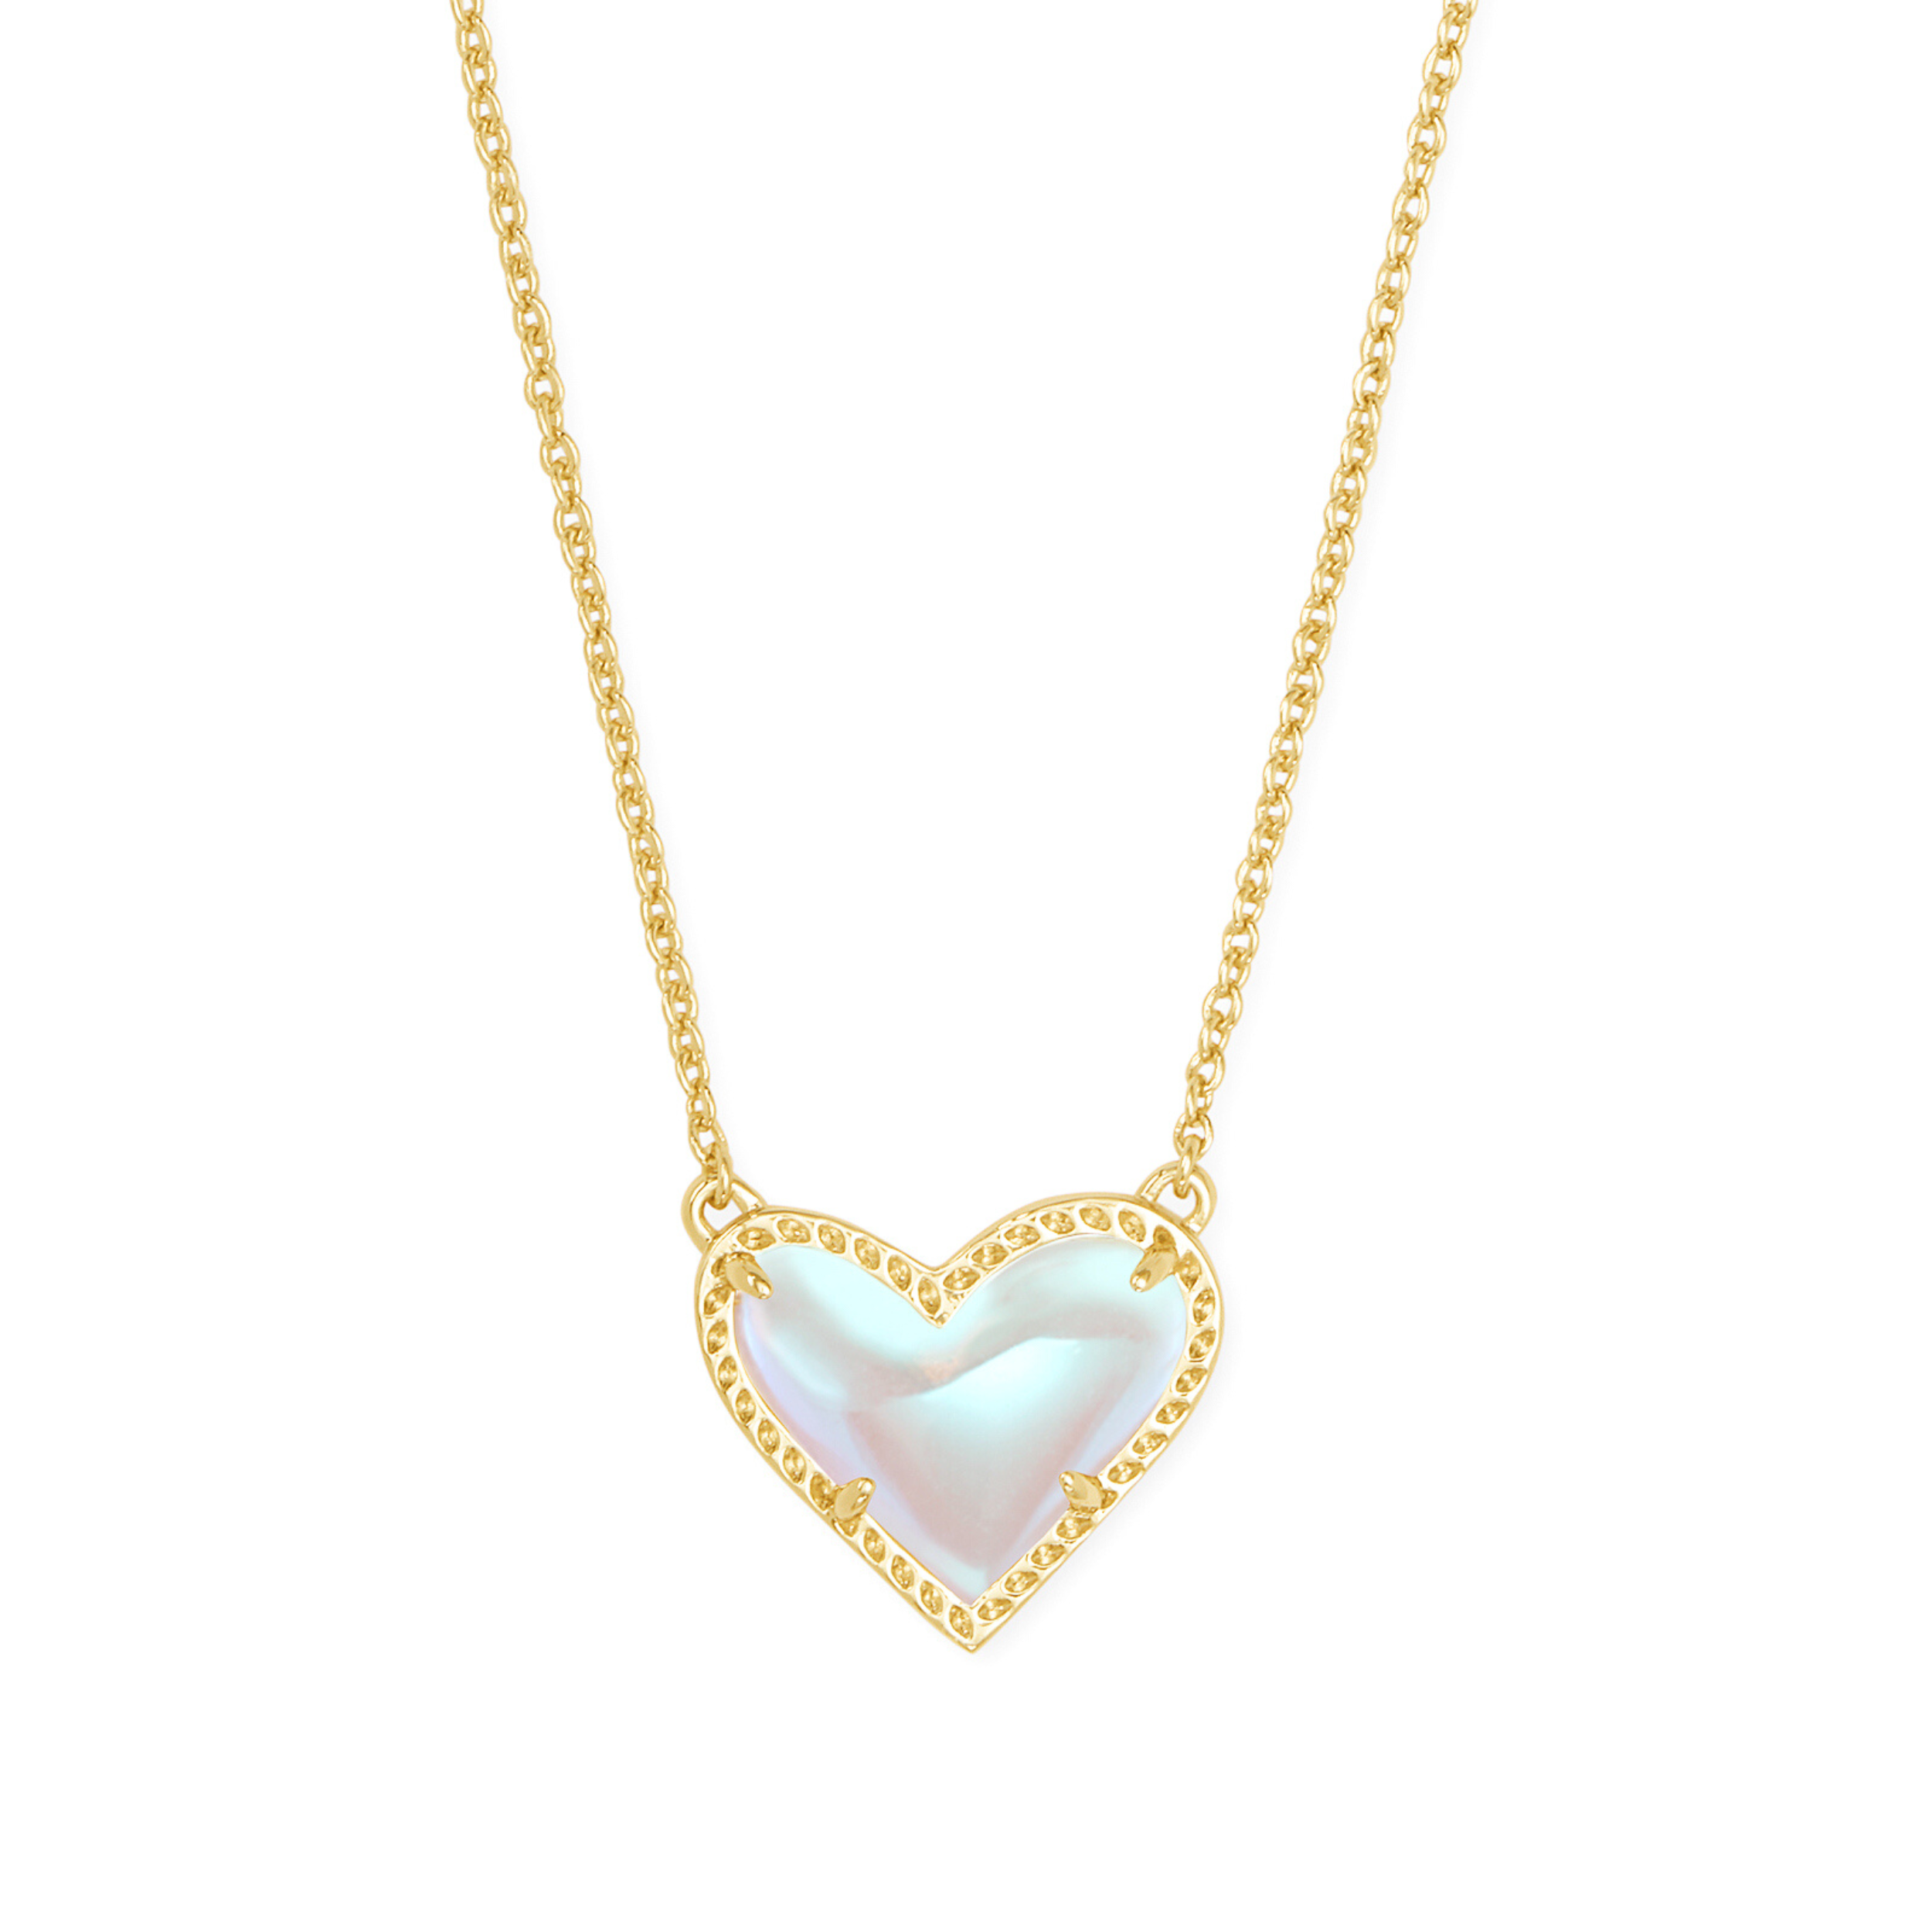 Top 10 Mother's Day Gifts With Kendra Scott + Promo! - The Double Take Girls